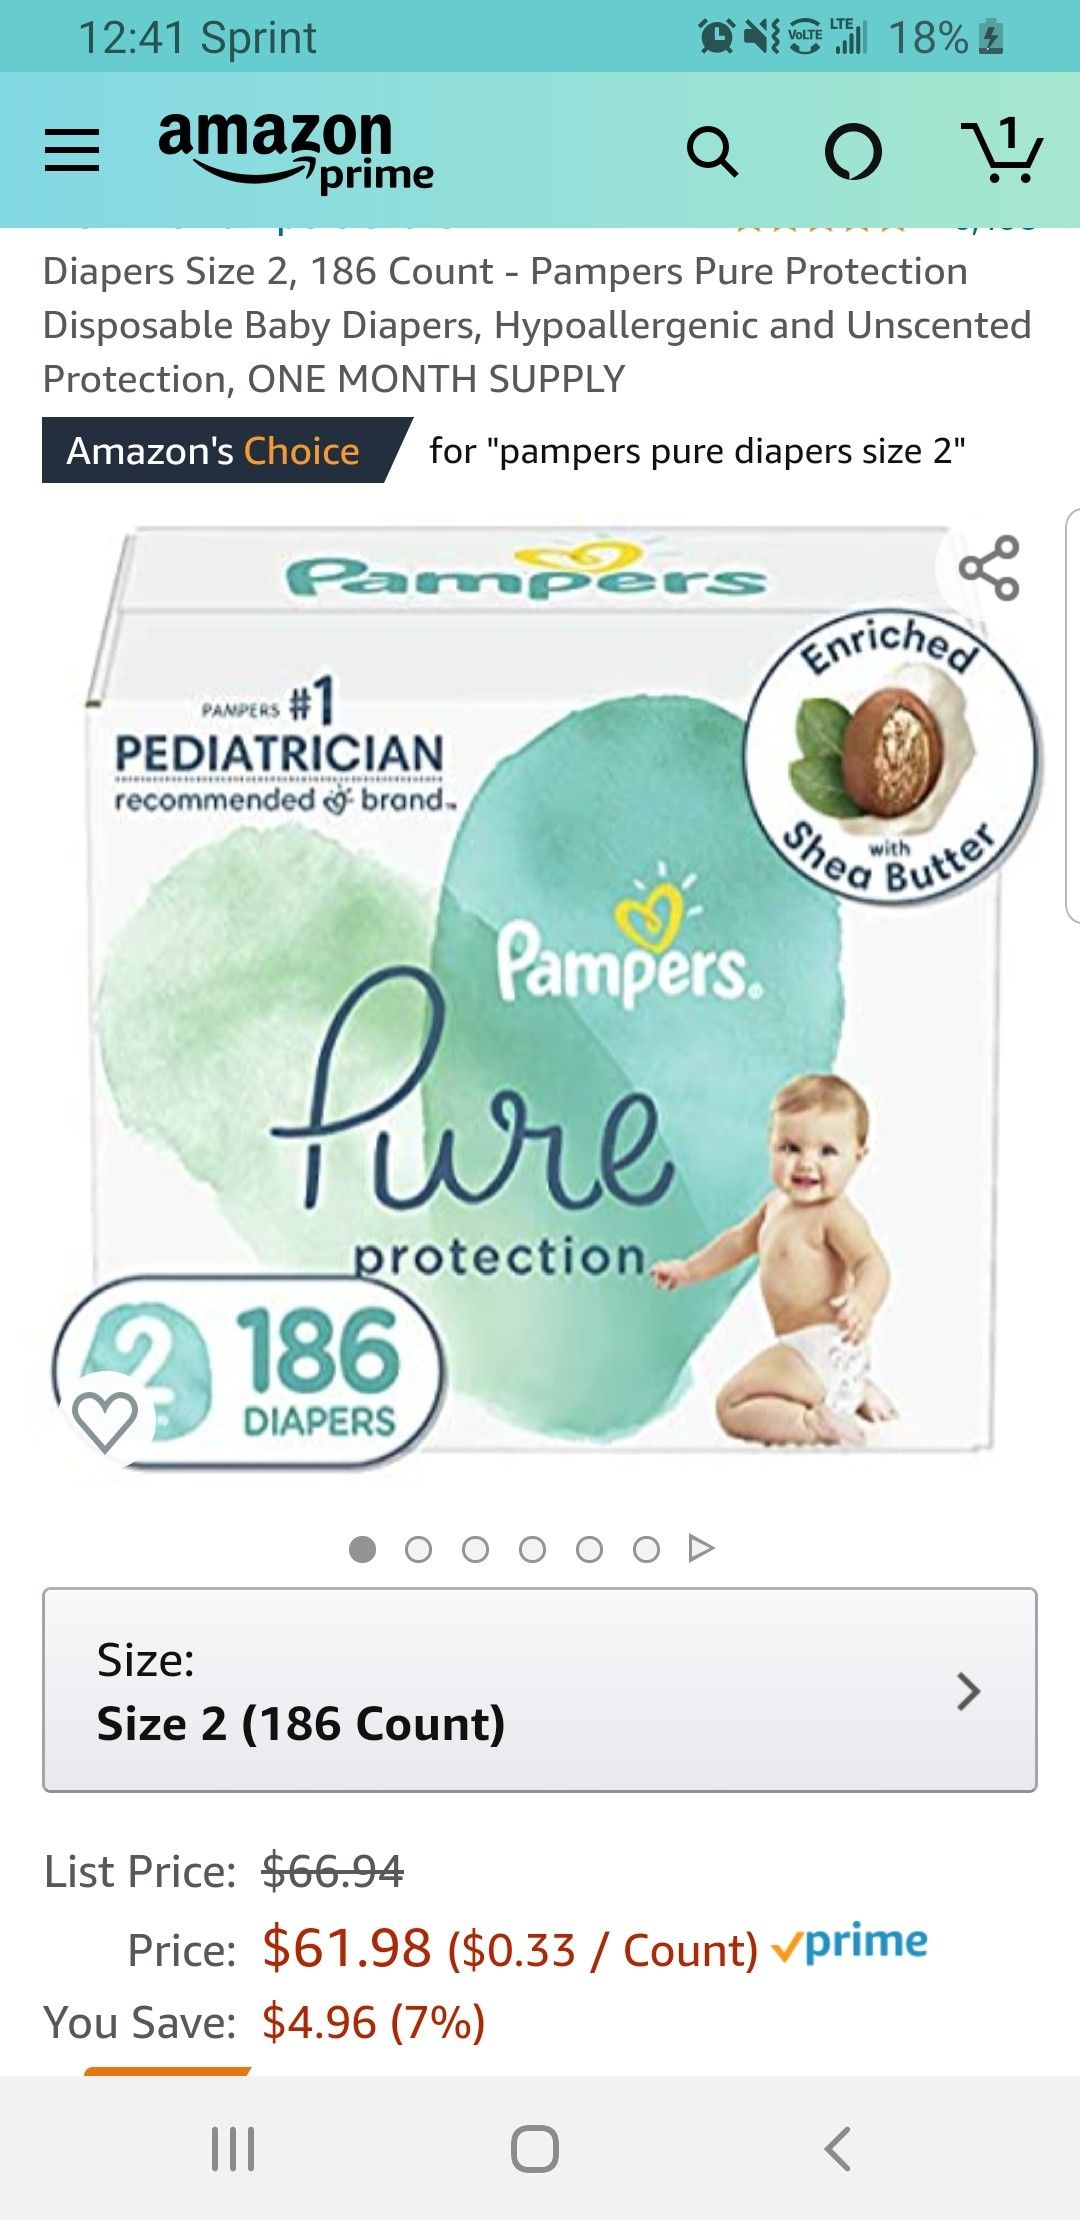 Diapers Size 2, 186 Count - Pampers Pure Protection Disposable Baby Diapers, Hypoallergenic and Unscented Protection, ONE MONTH SUPPLY